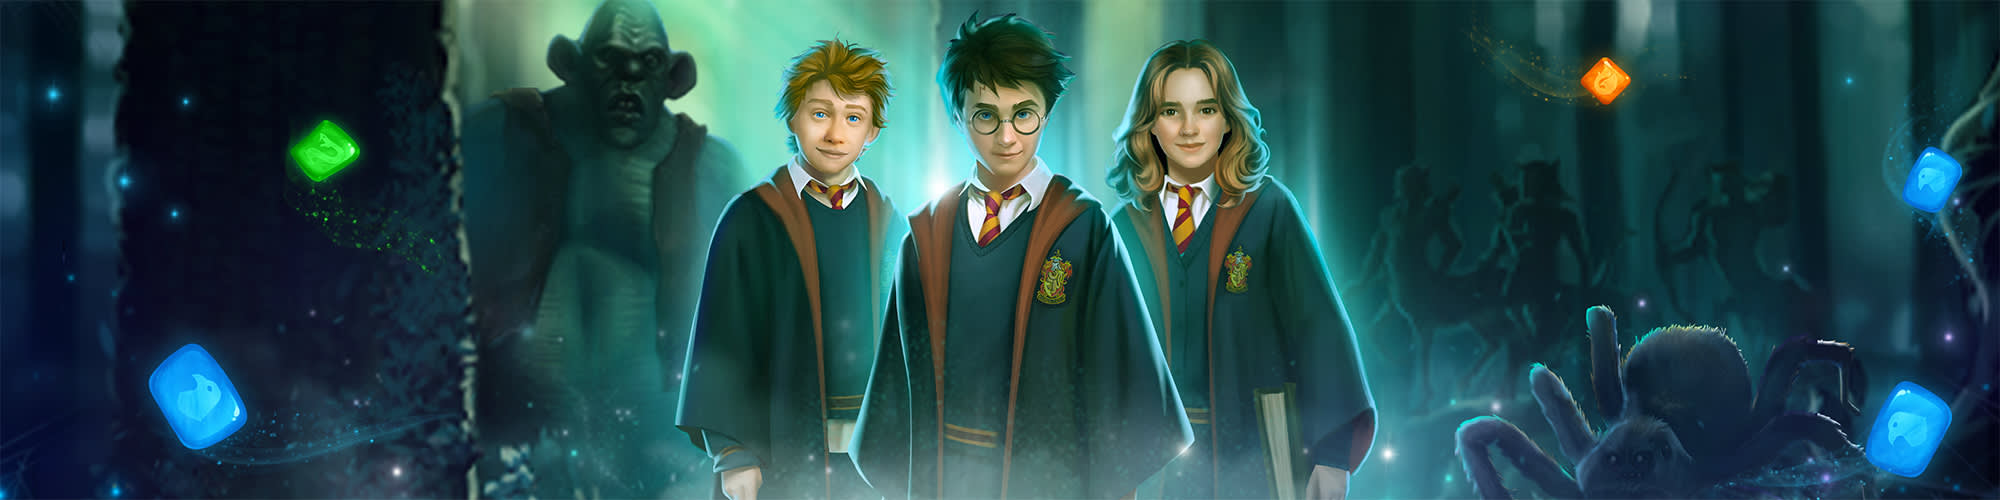 puzzles-and-spell-club-challenge-header-harry-ron-hermione-web-landscape